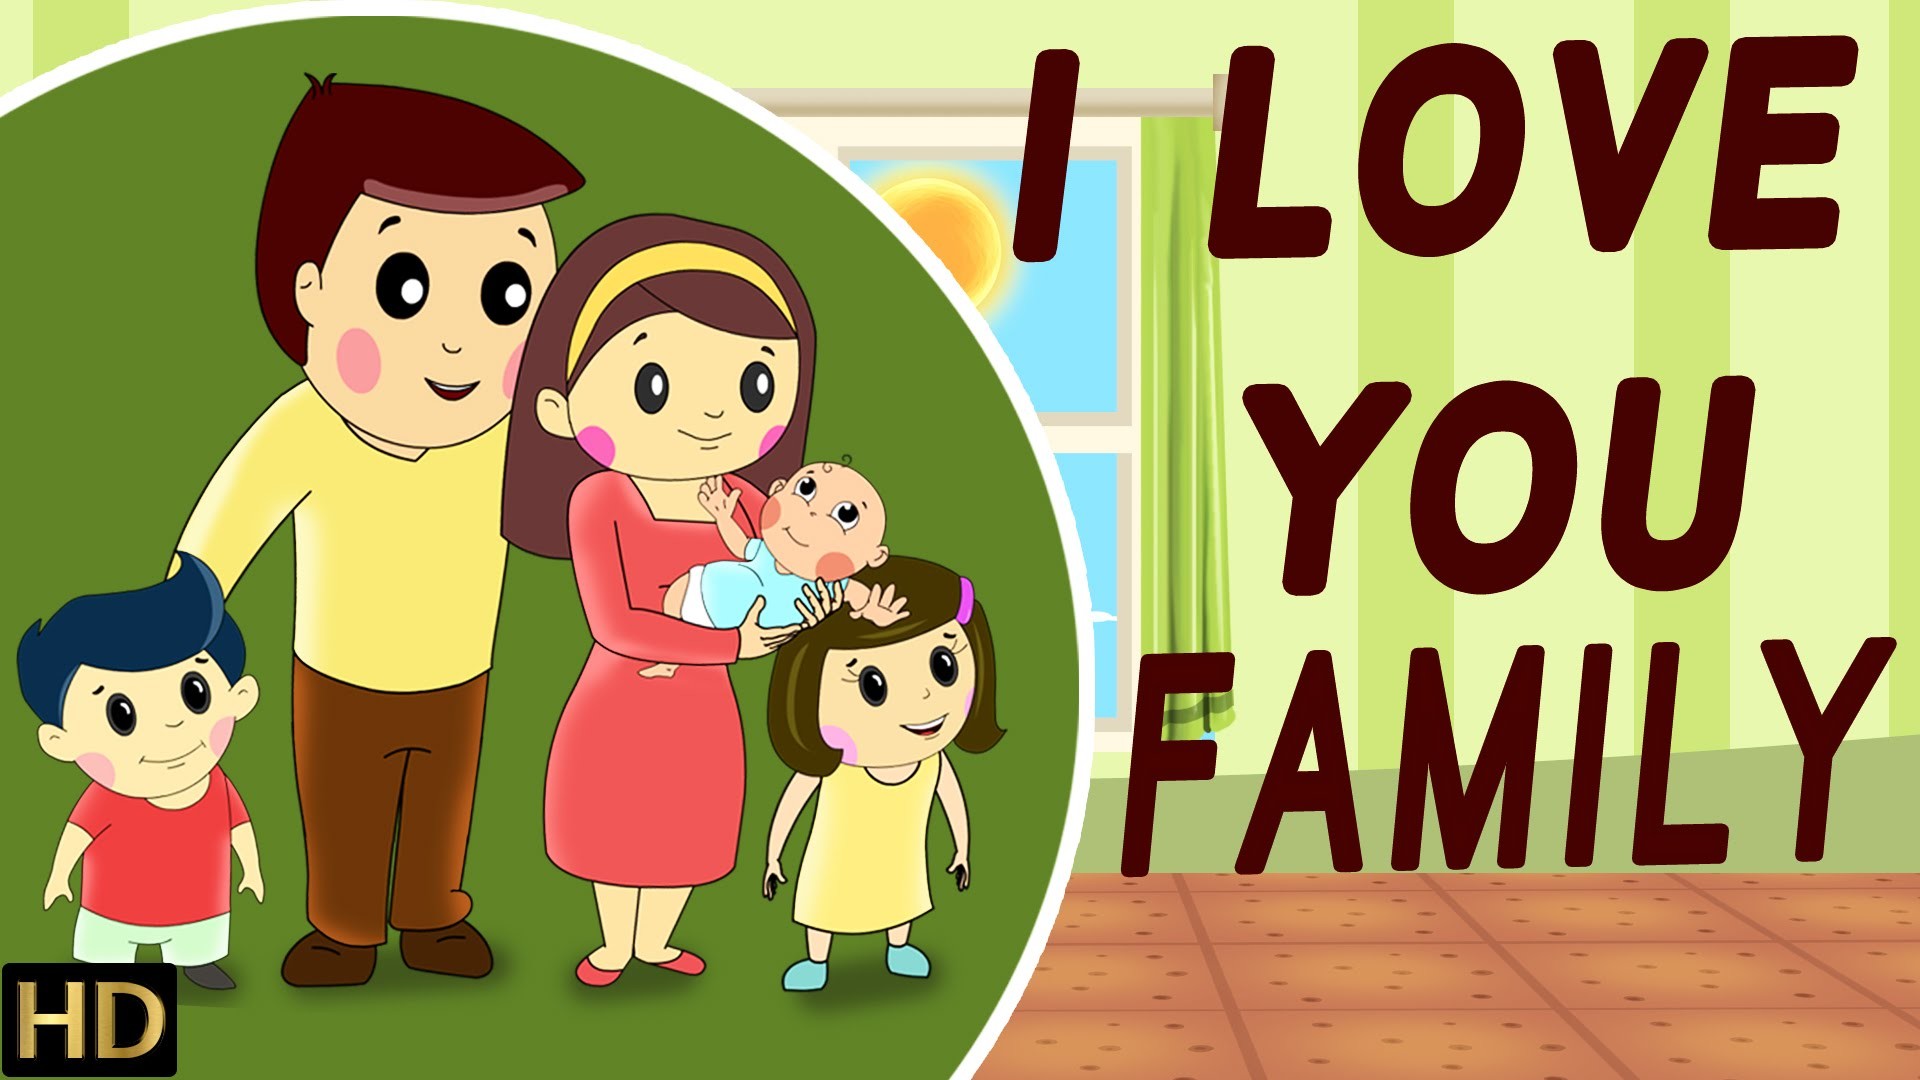 I Love You - Love You All Family - 1920x1080 Wallpaper 